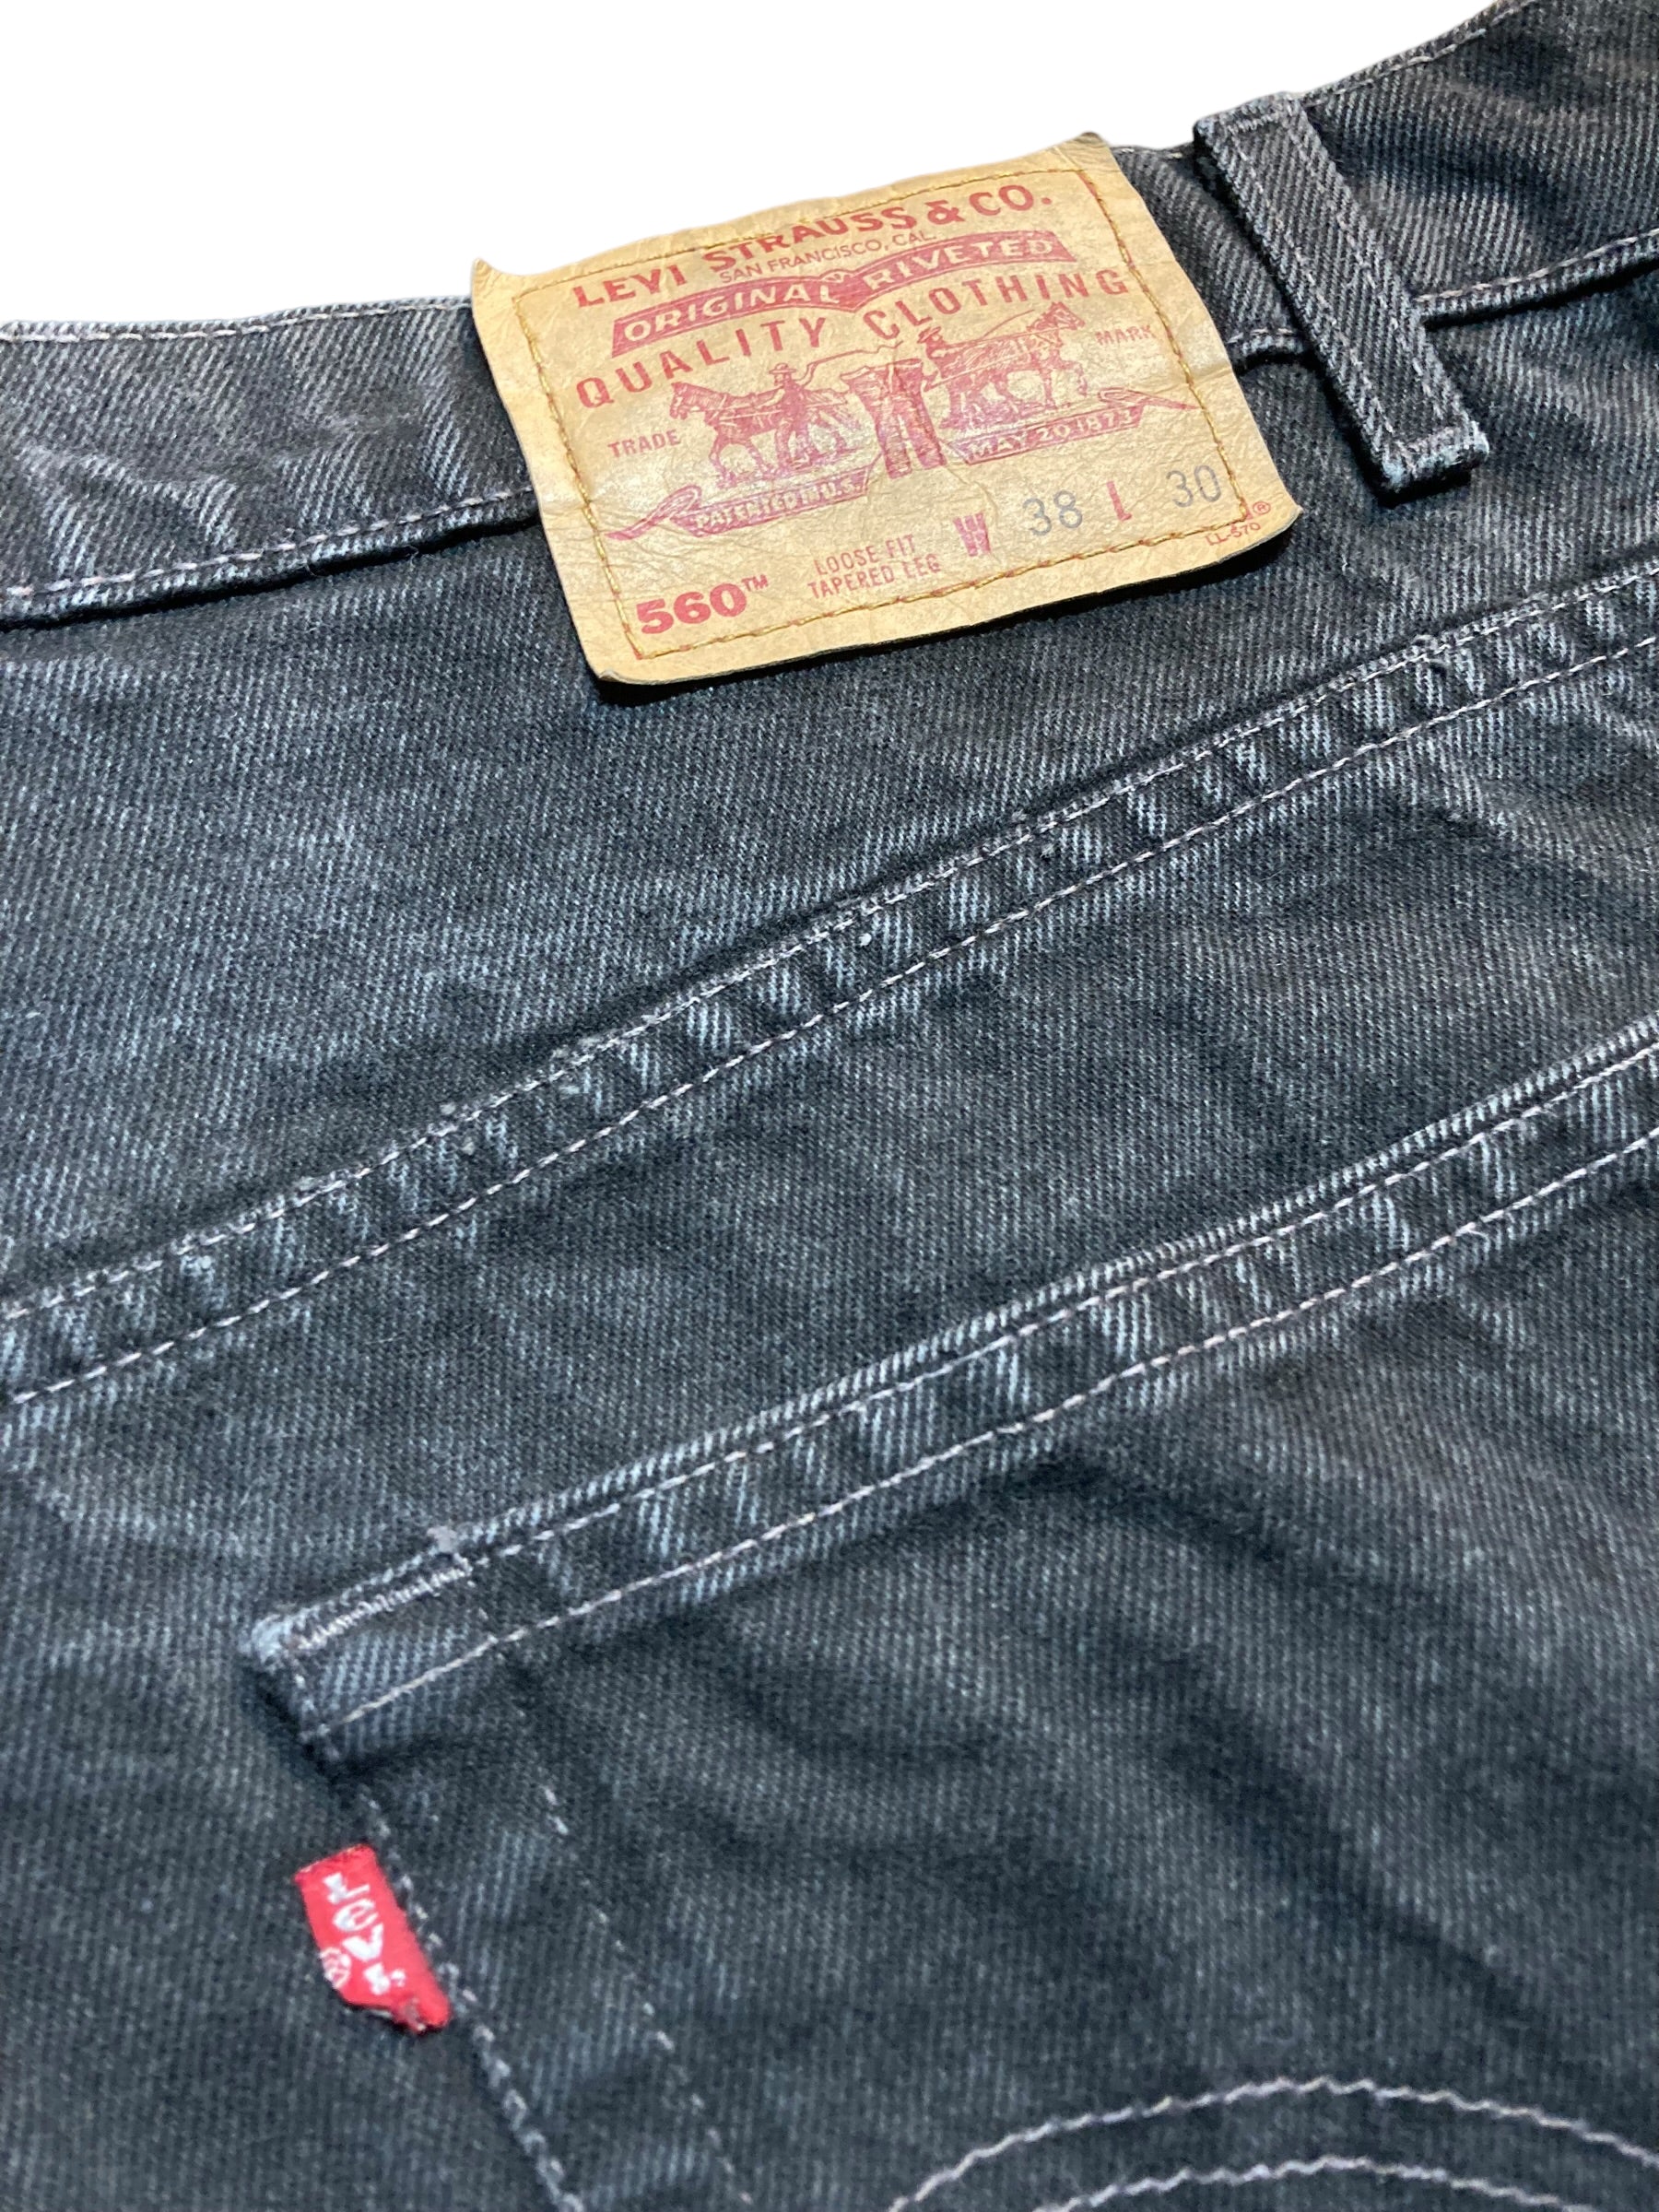 90s Levi's リーバイス 550 relax fit 560 501